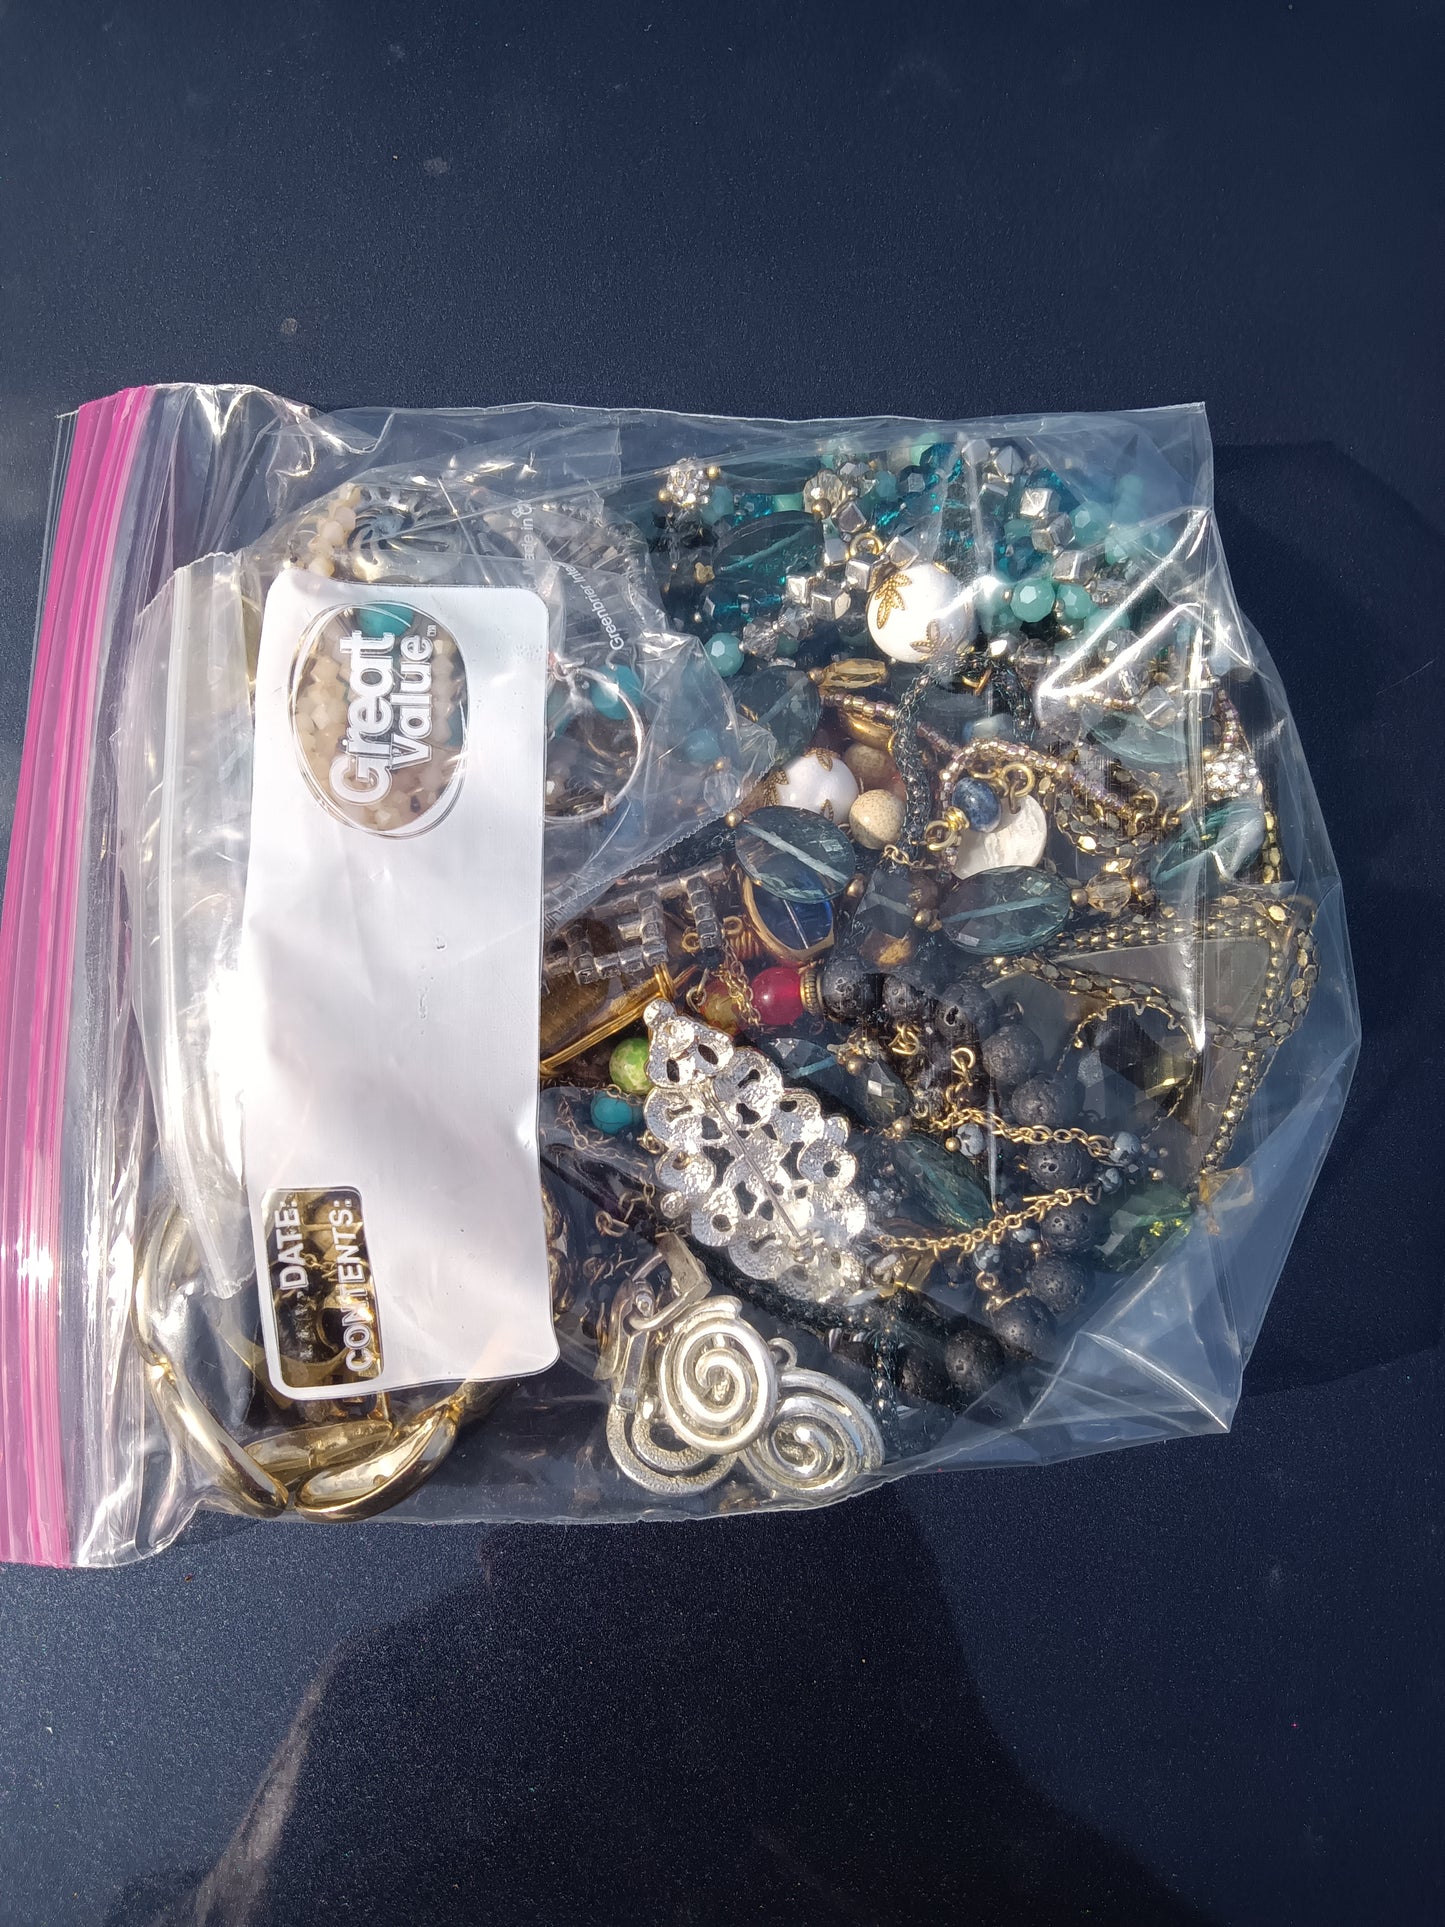 Mystery Mixed Costume Jewelry Bag - 1 Pound - No. 26